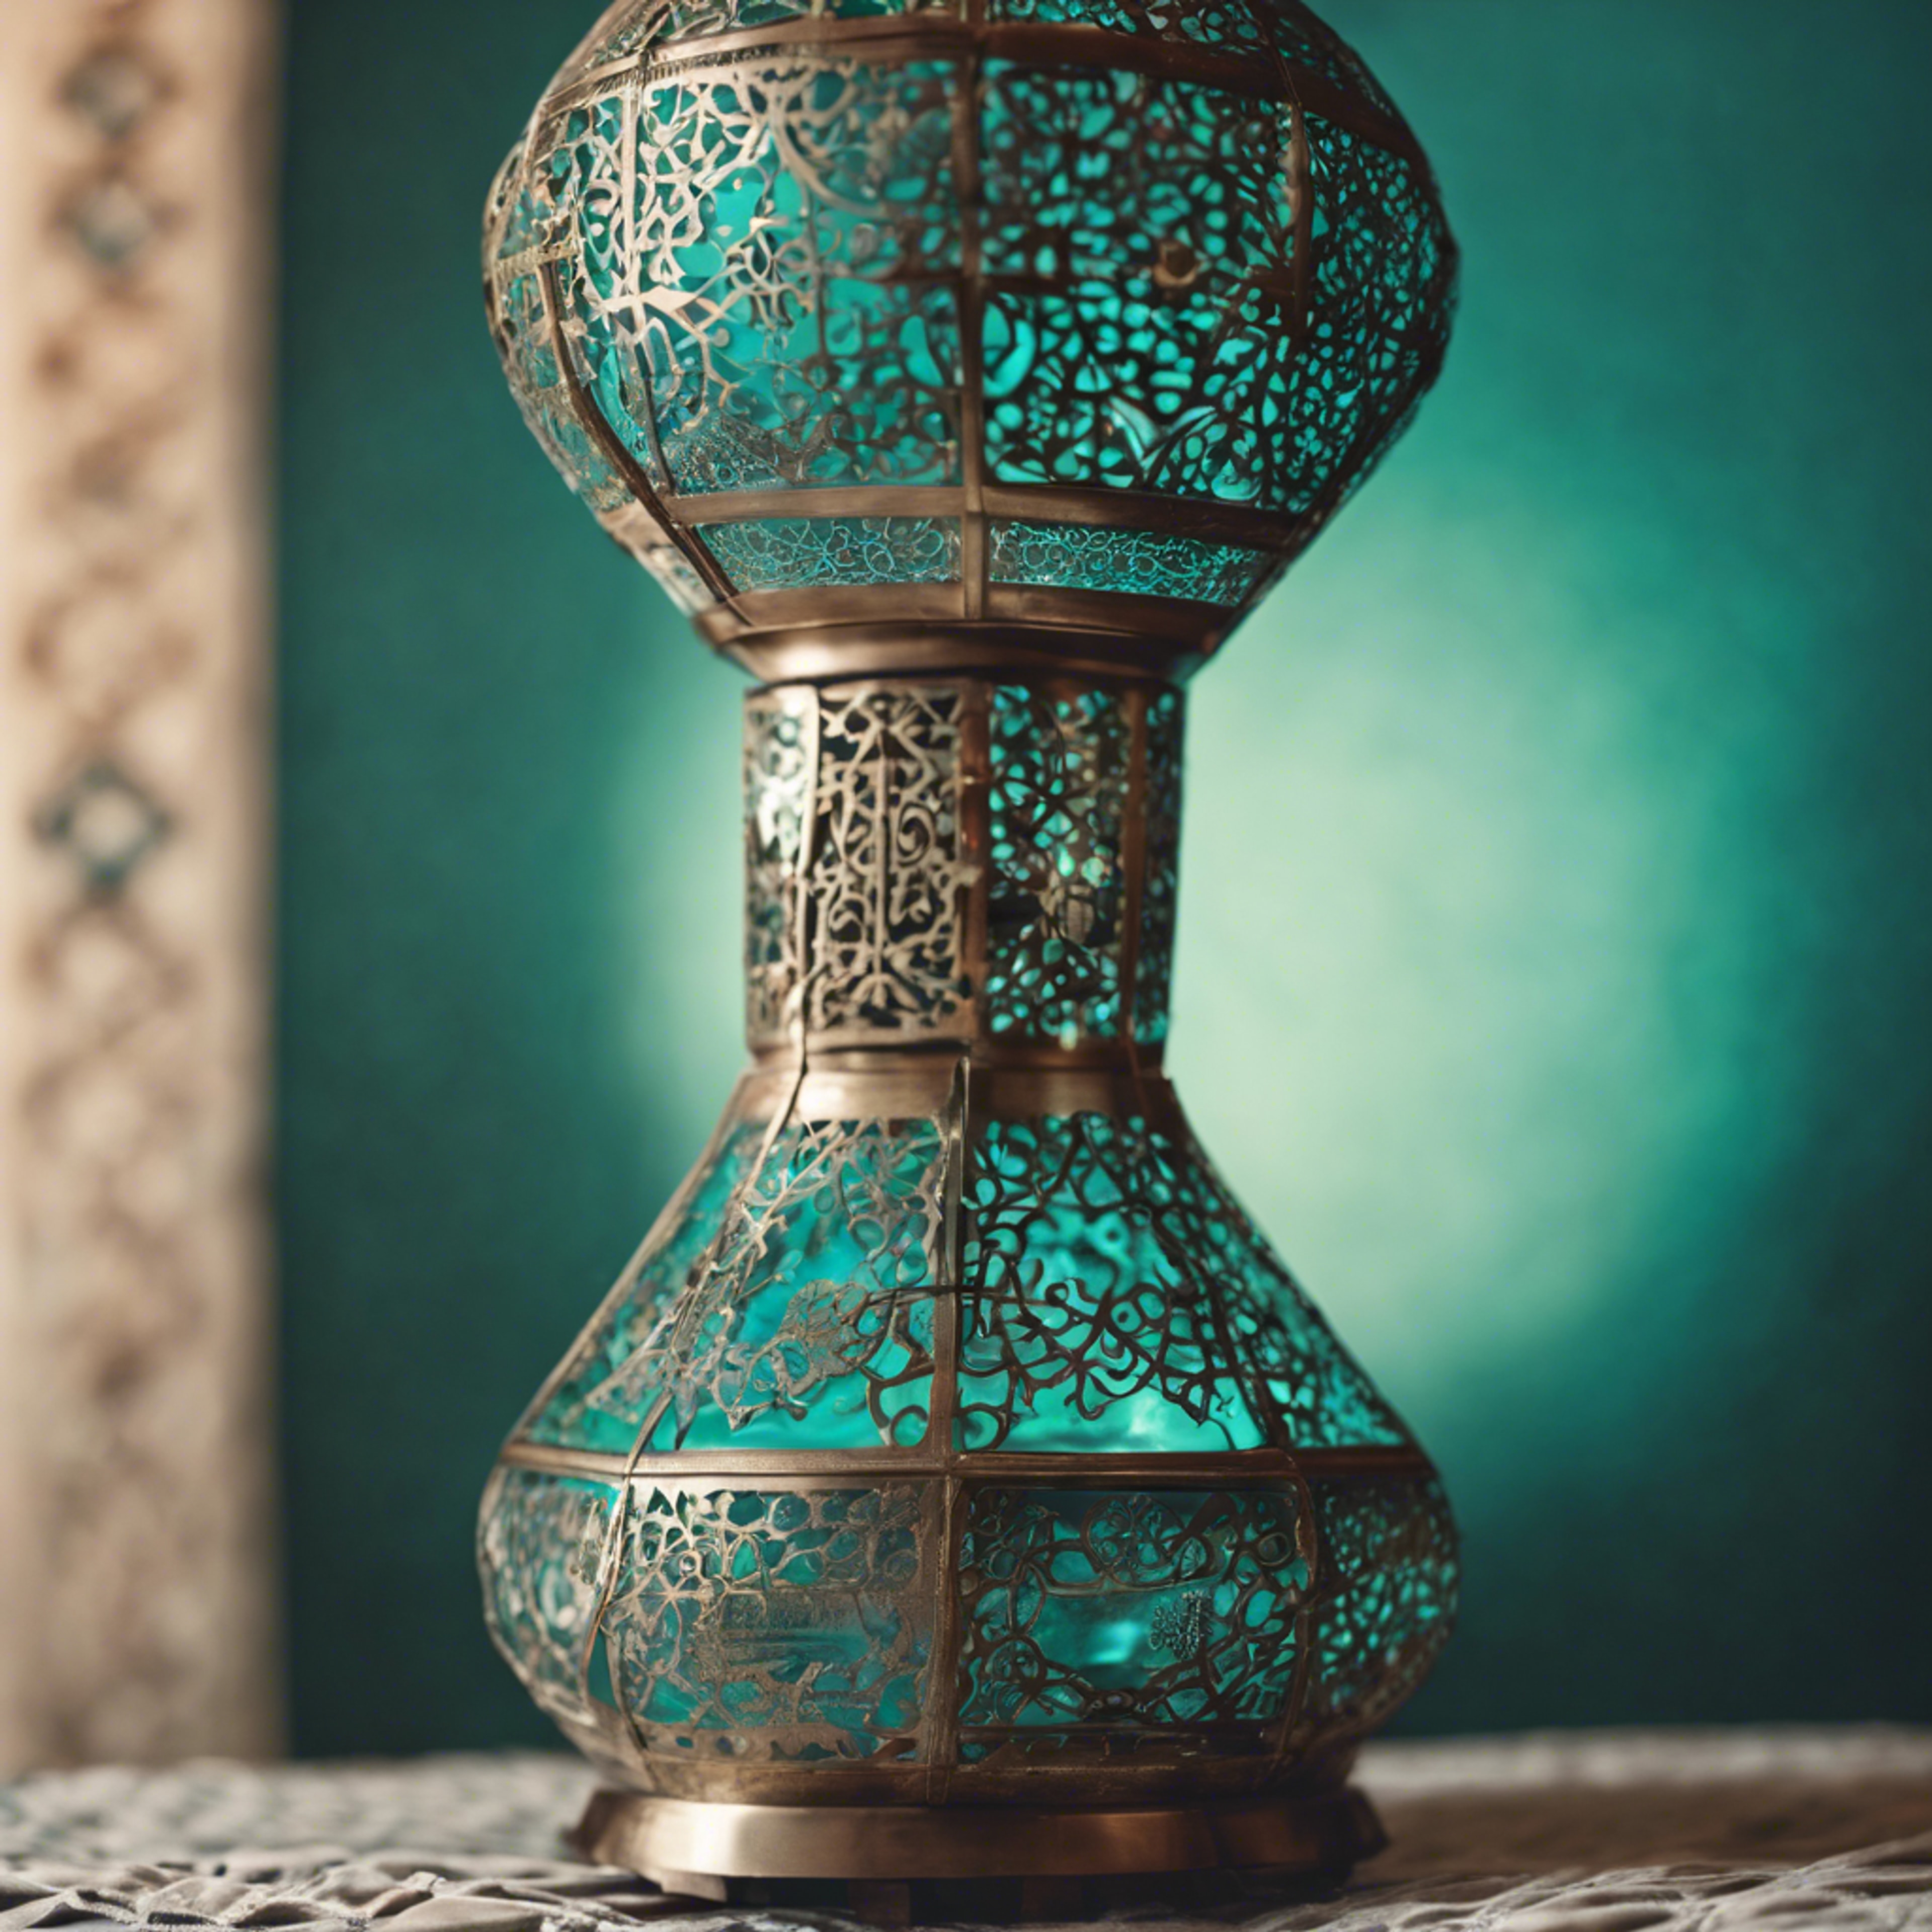 A traditional Moroccan lamp in a cool teal color. Шпалери[a27f0371dbce4744aca5]